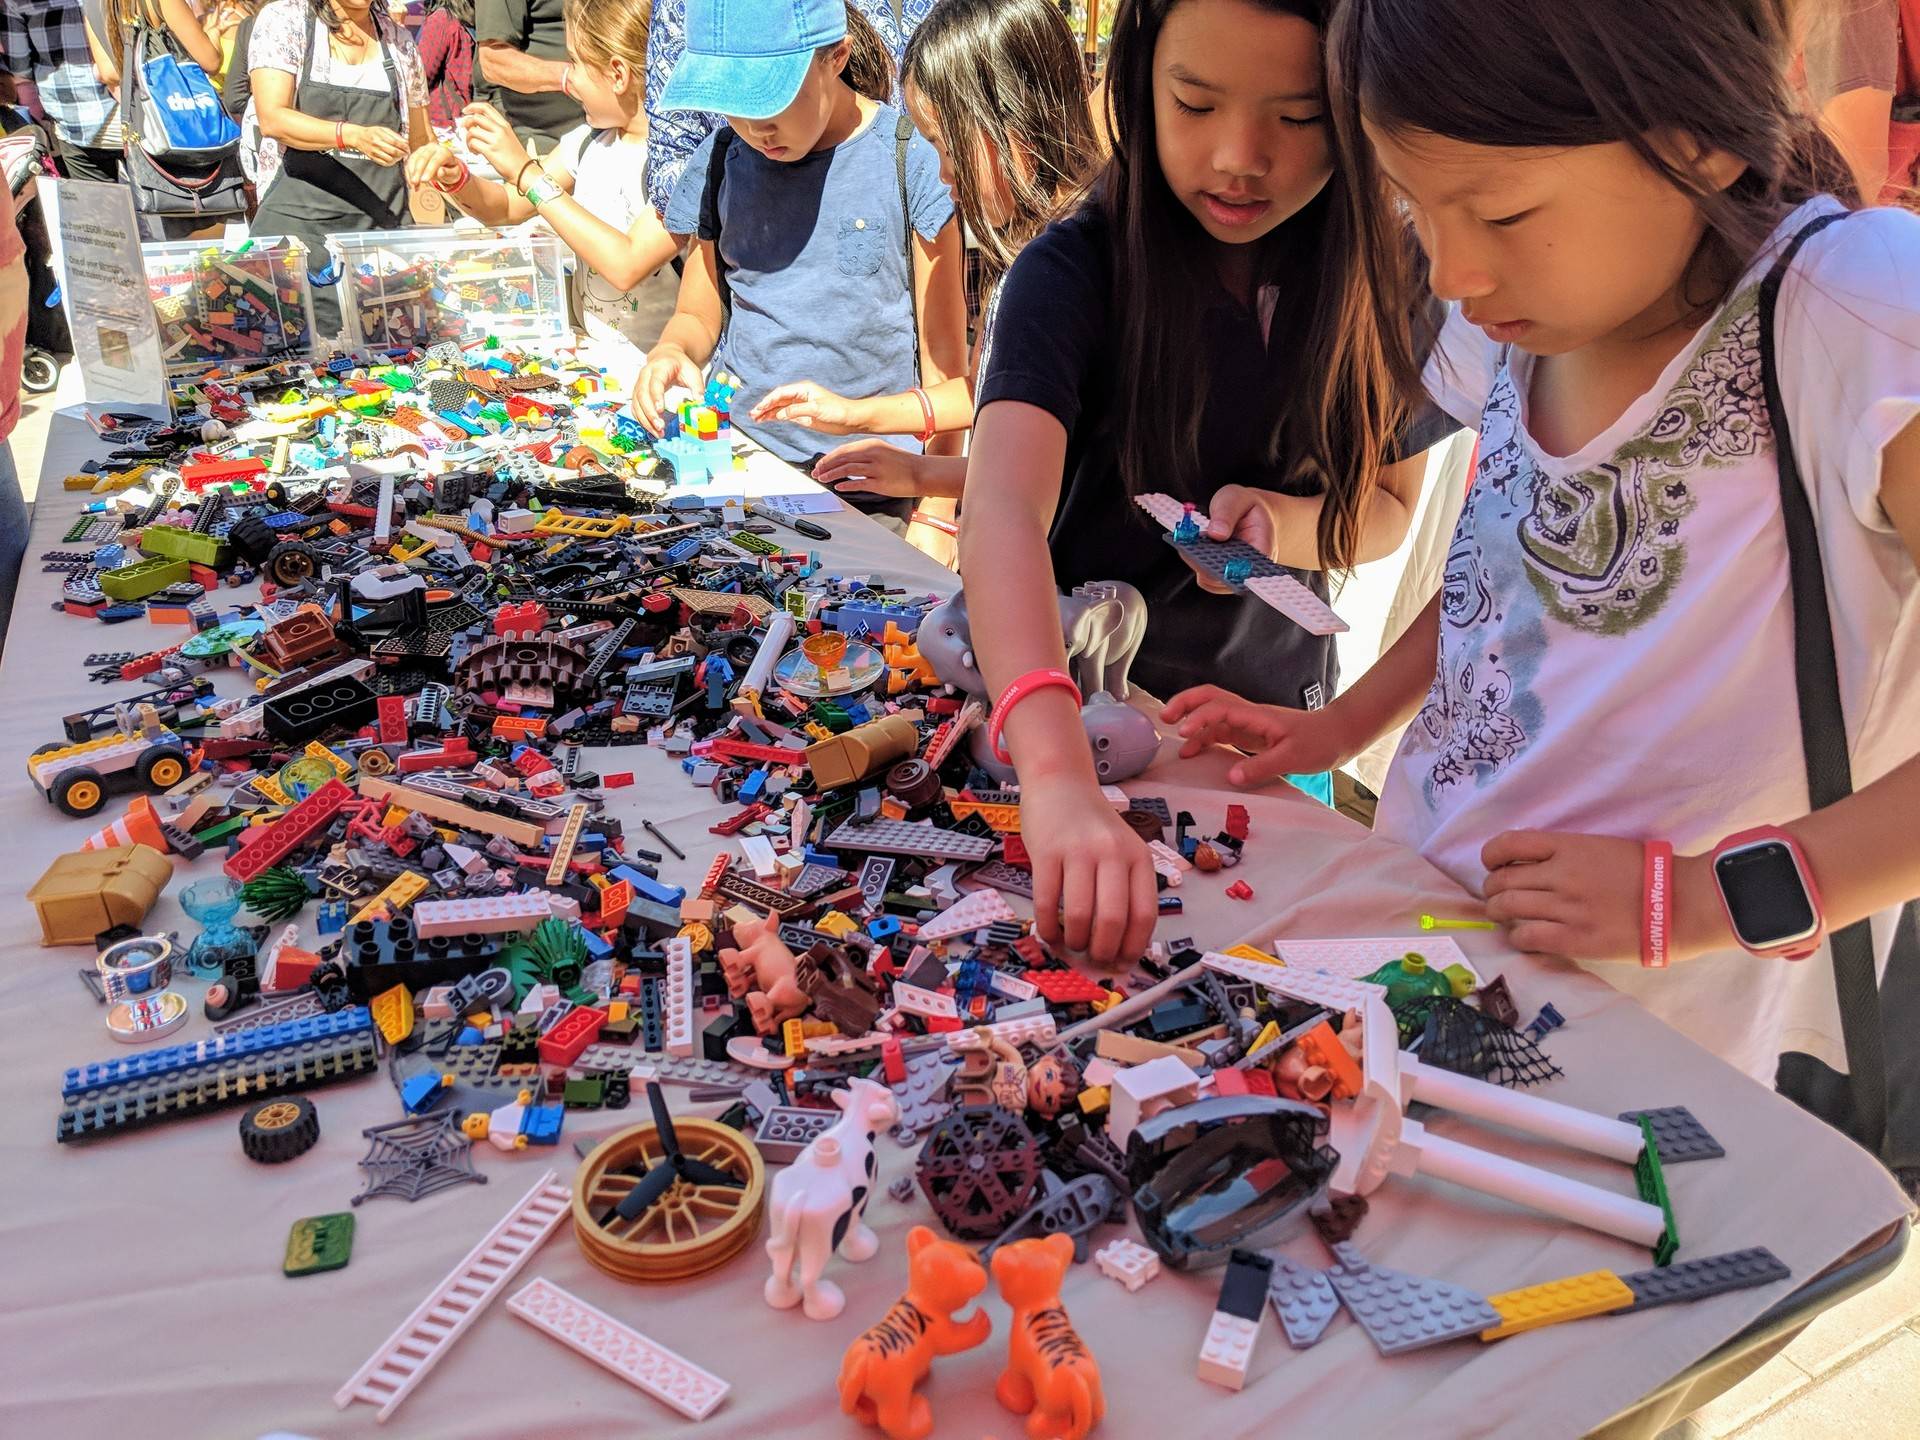 Two girls explore the Lego station at the 'makerspace' at the Girls' Festival. In addition to the makerspace, the festival featured panels and workshops, including a 'Girlpreneur' pitch competition. 'I liked how the girls like came up with their own business ideas... these girls they take chances and risks to do what they want,' said 11-year-old attendee Riley Wilson. Muna Danish/KQED